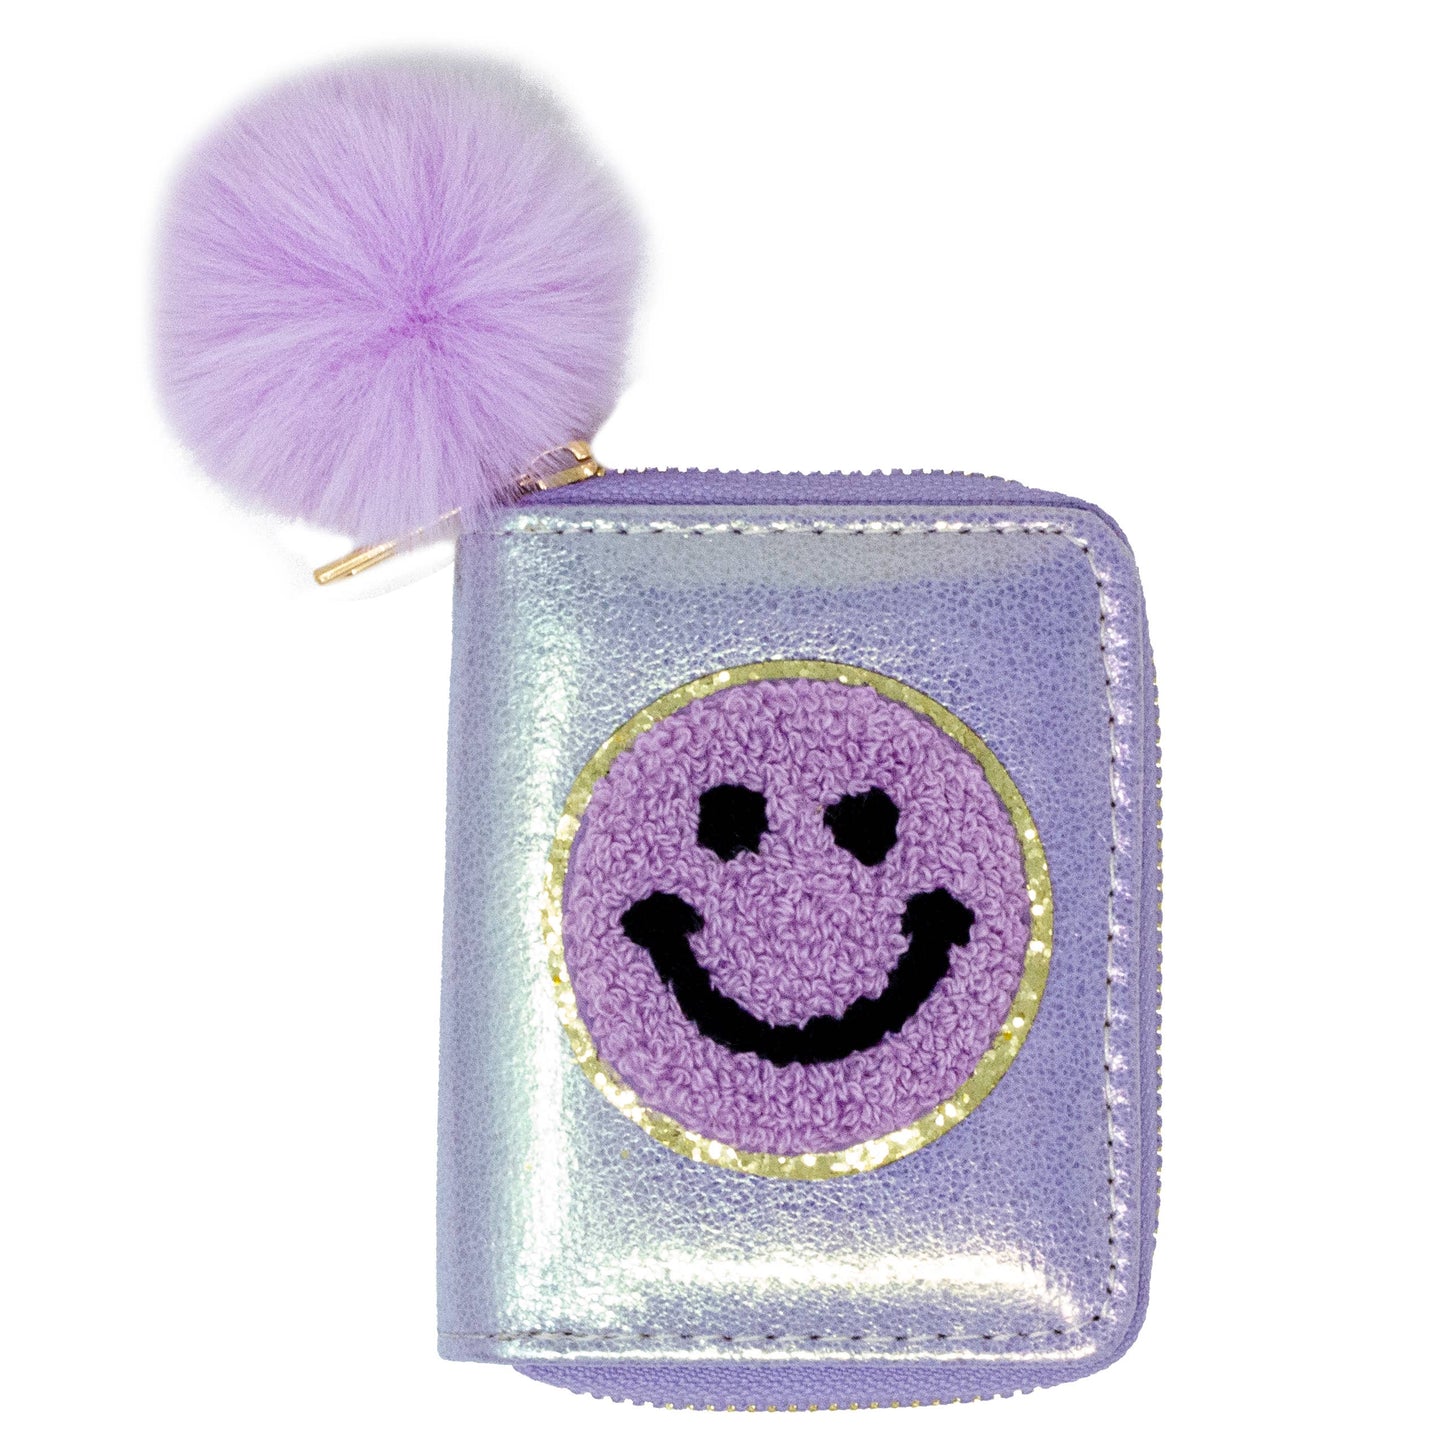 Shiny Happy Face Smile Wallet: Hot Pink